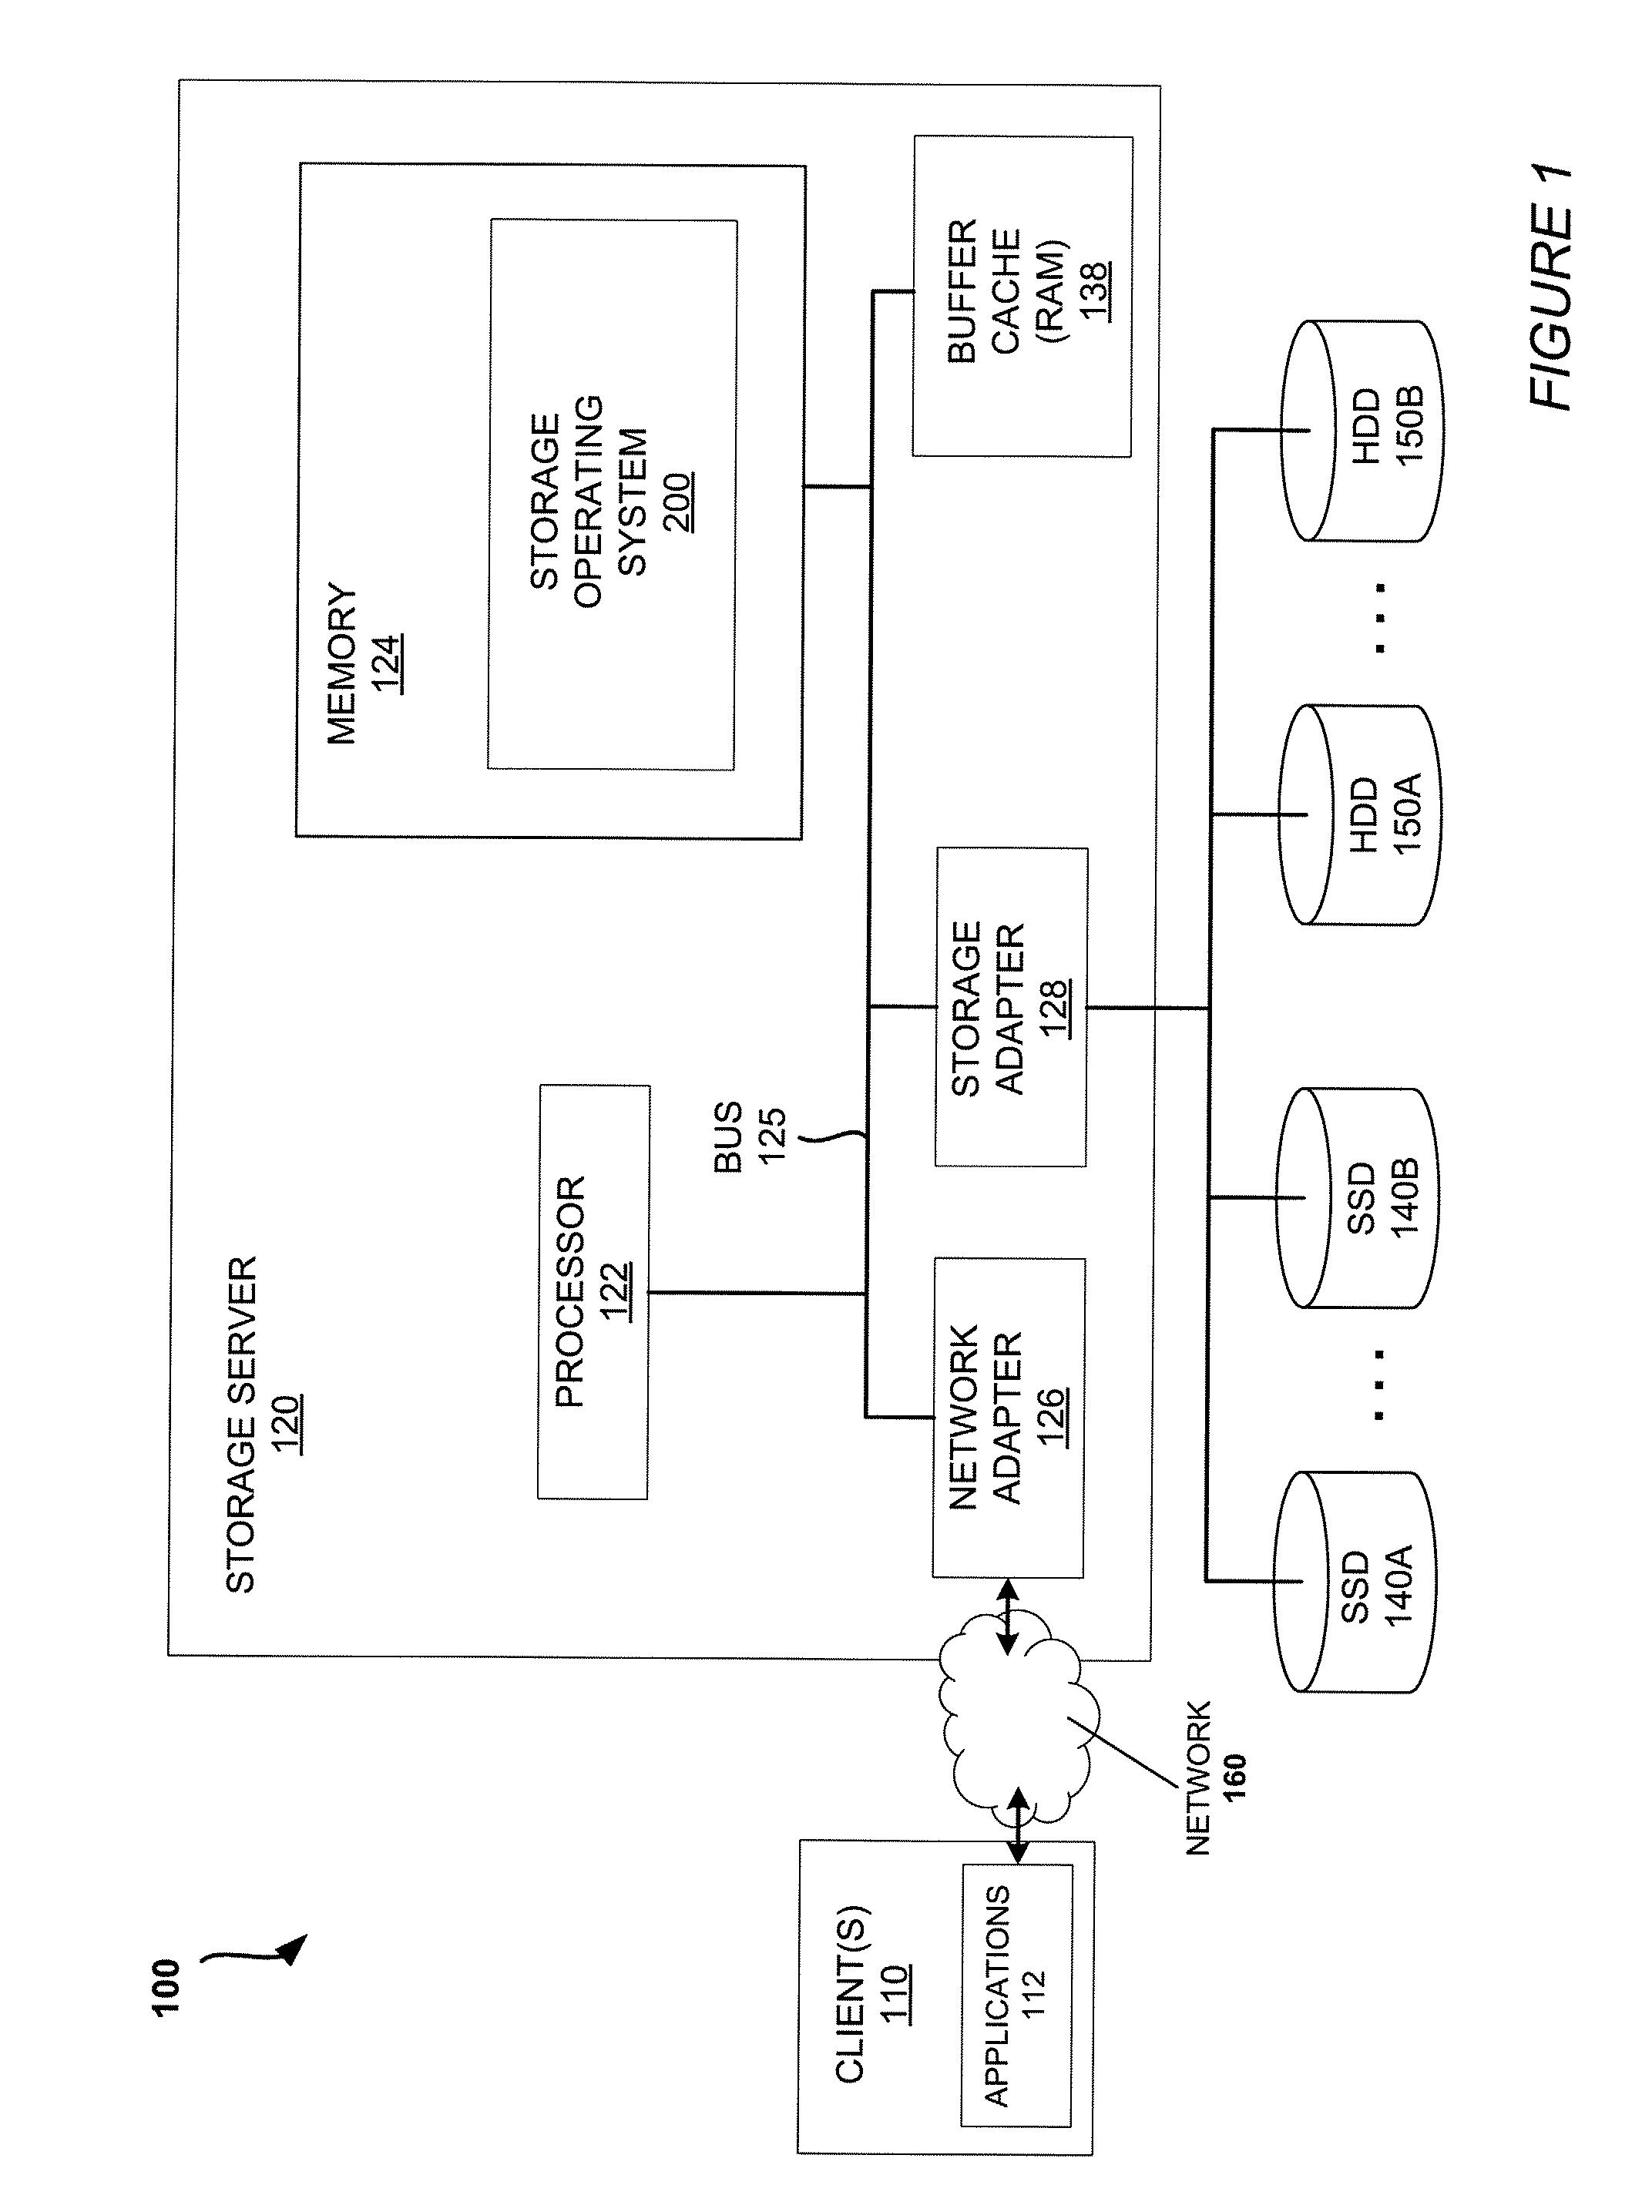 Mechanisms for moving data in a hybrid aggregate